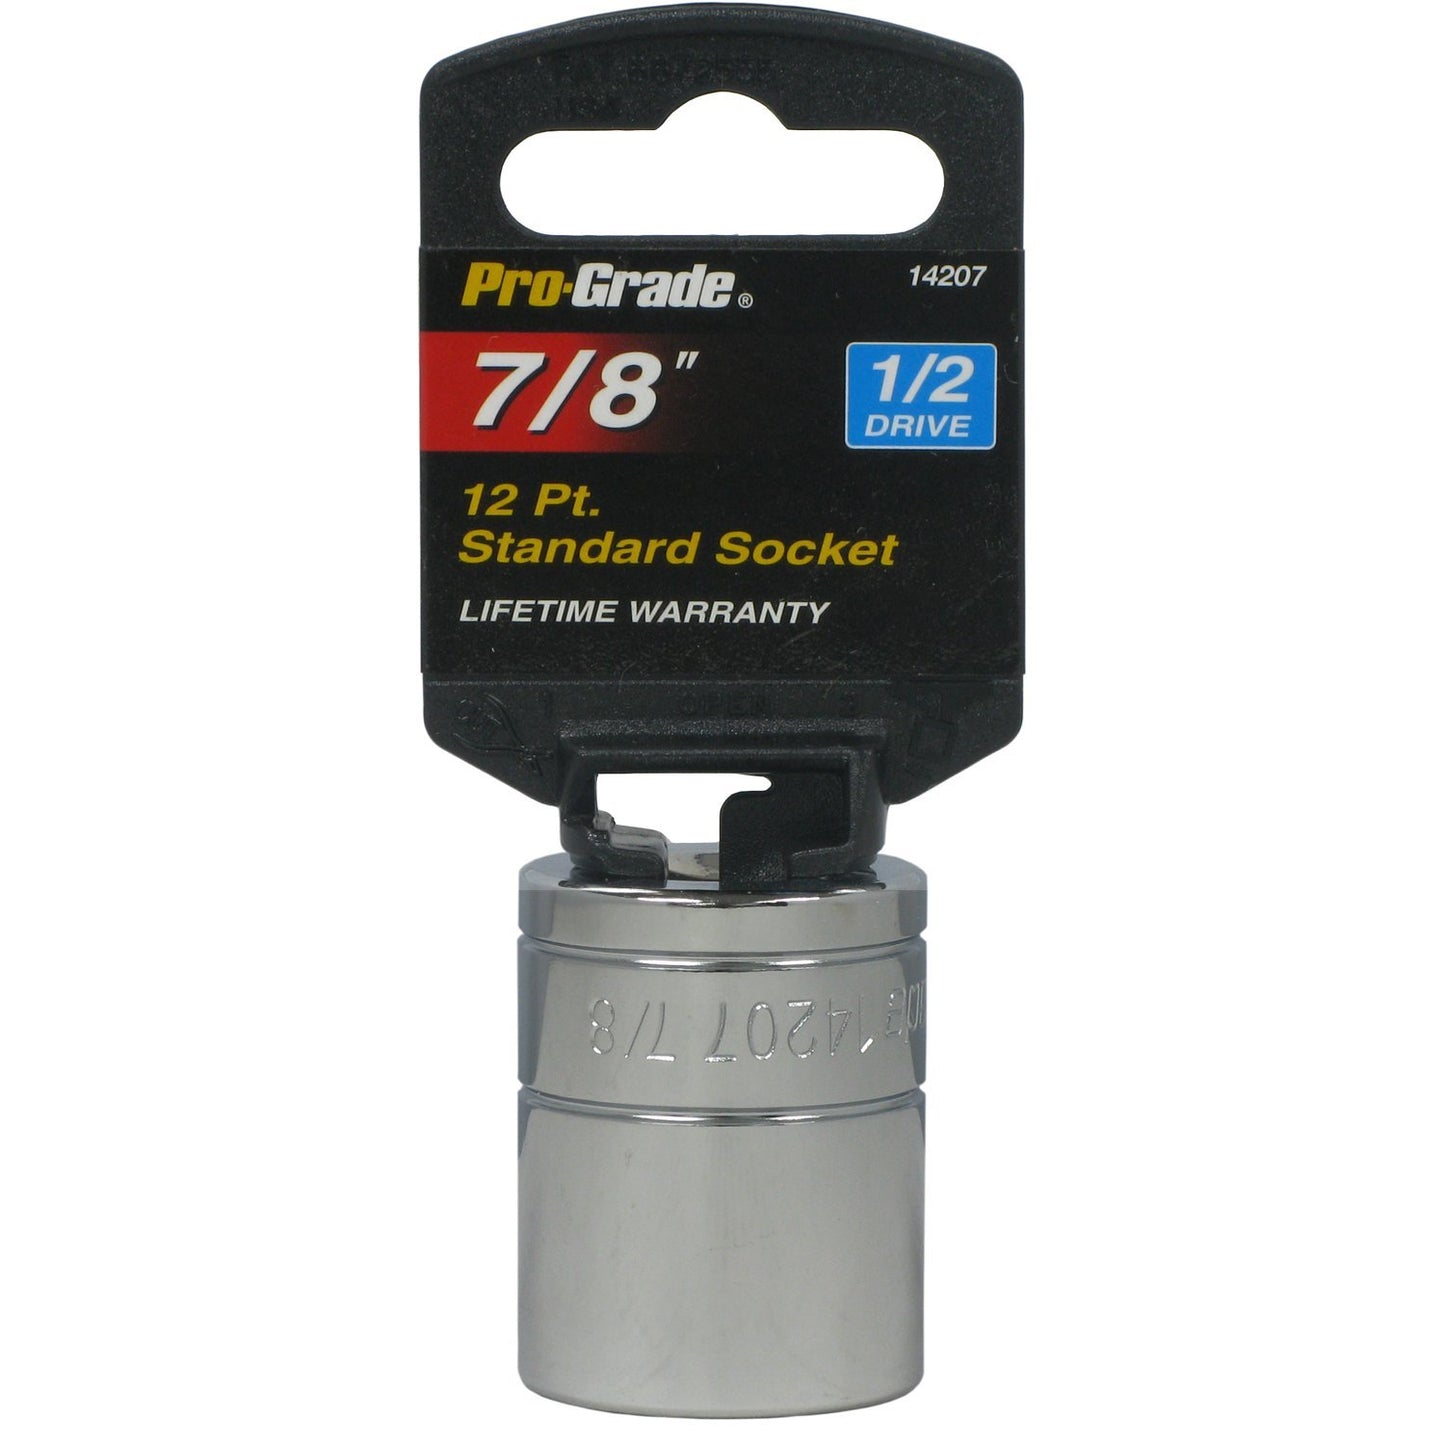 Choose Your Size - 1/2" Drive Standard Shallow Socket from 5/8 to 1-1/8"